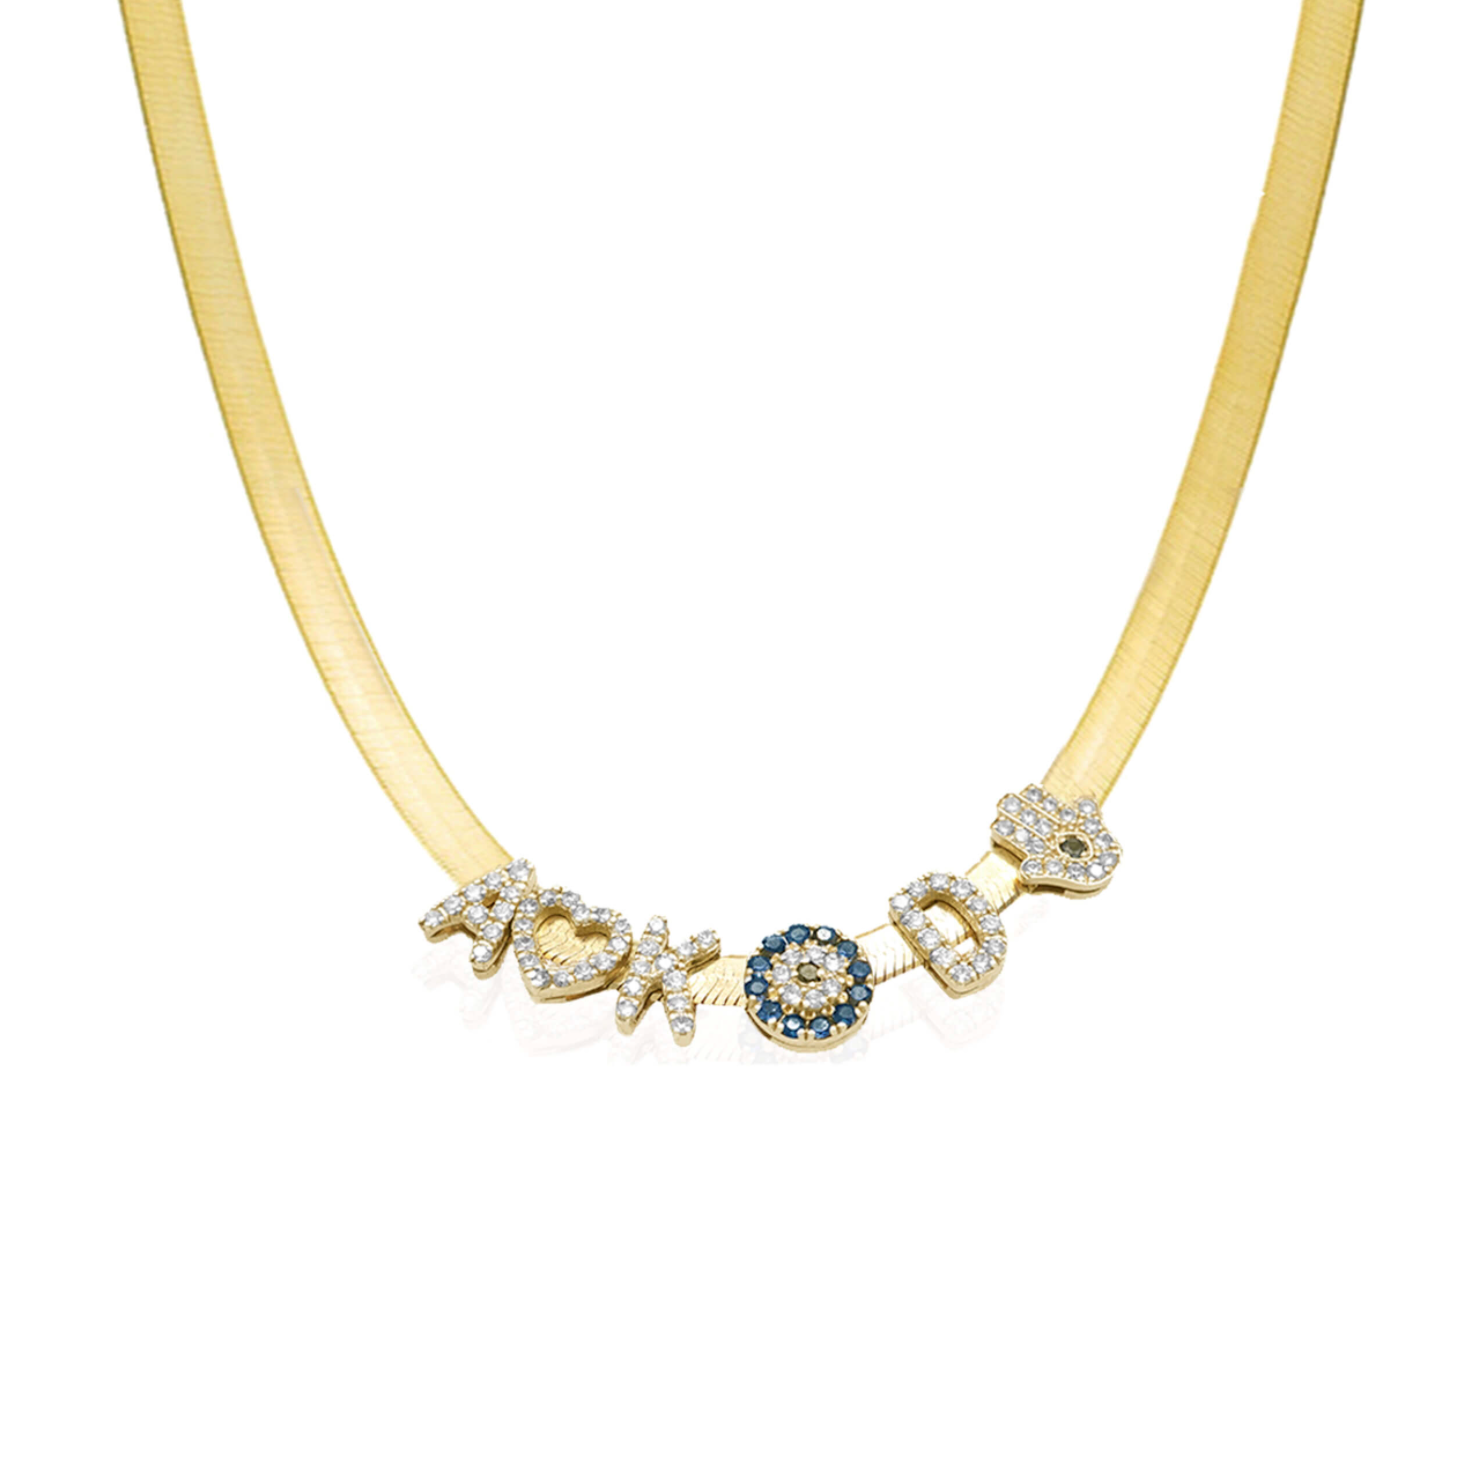 Personalized liquid gold necklace